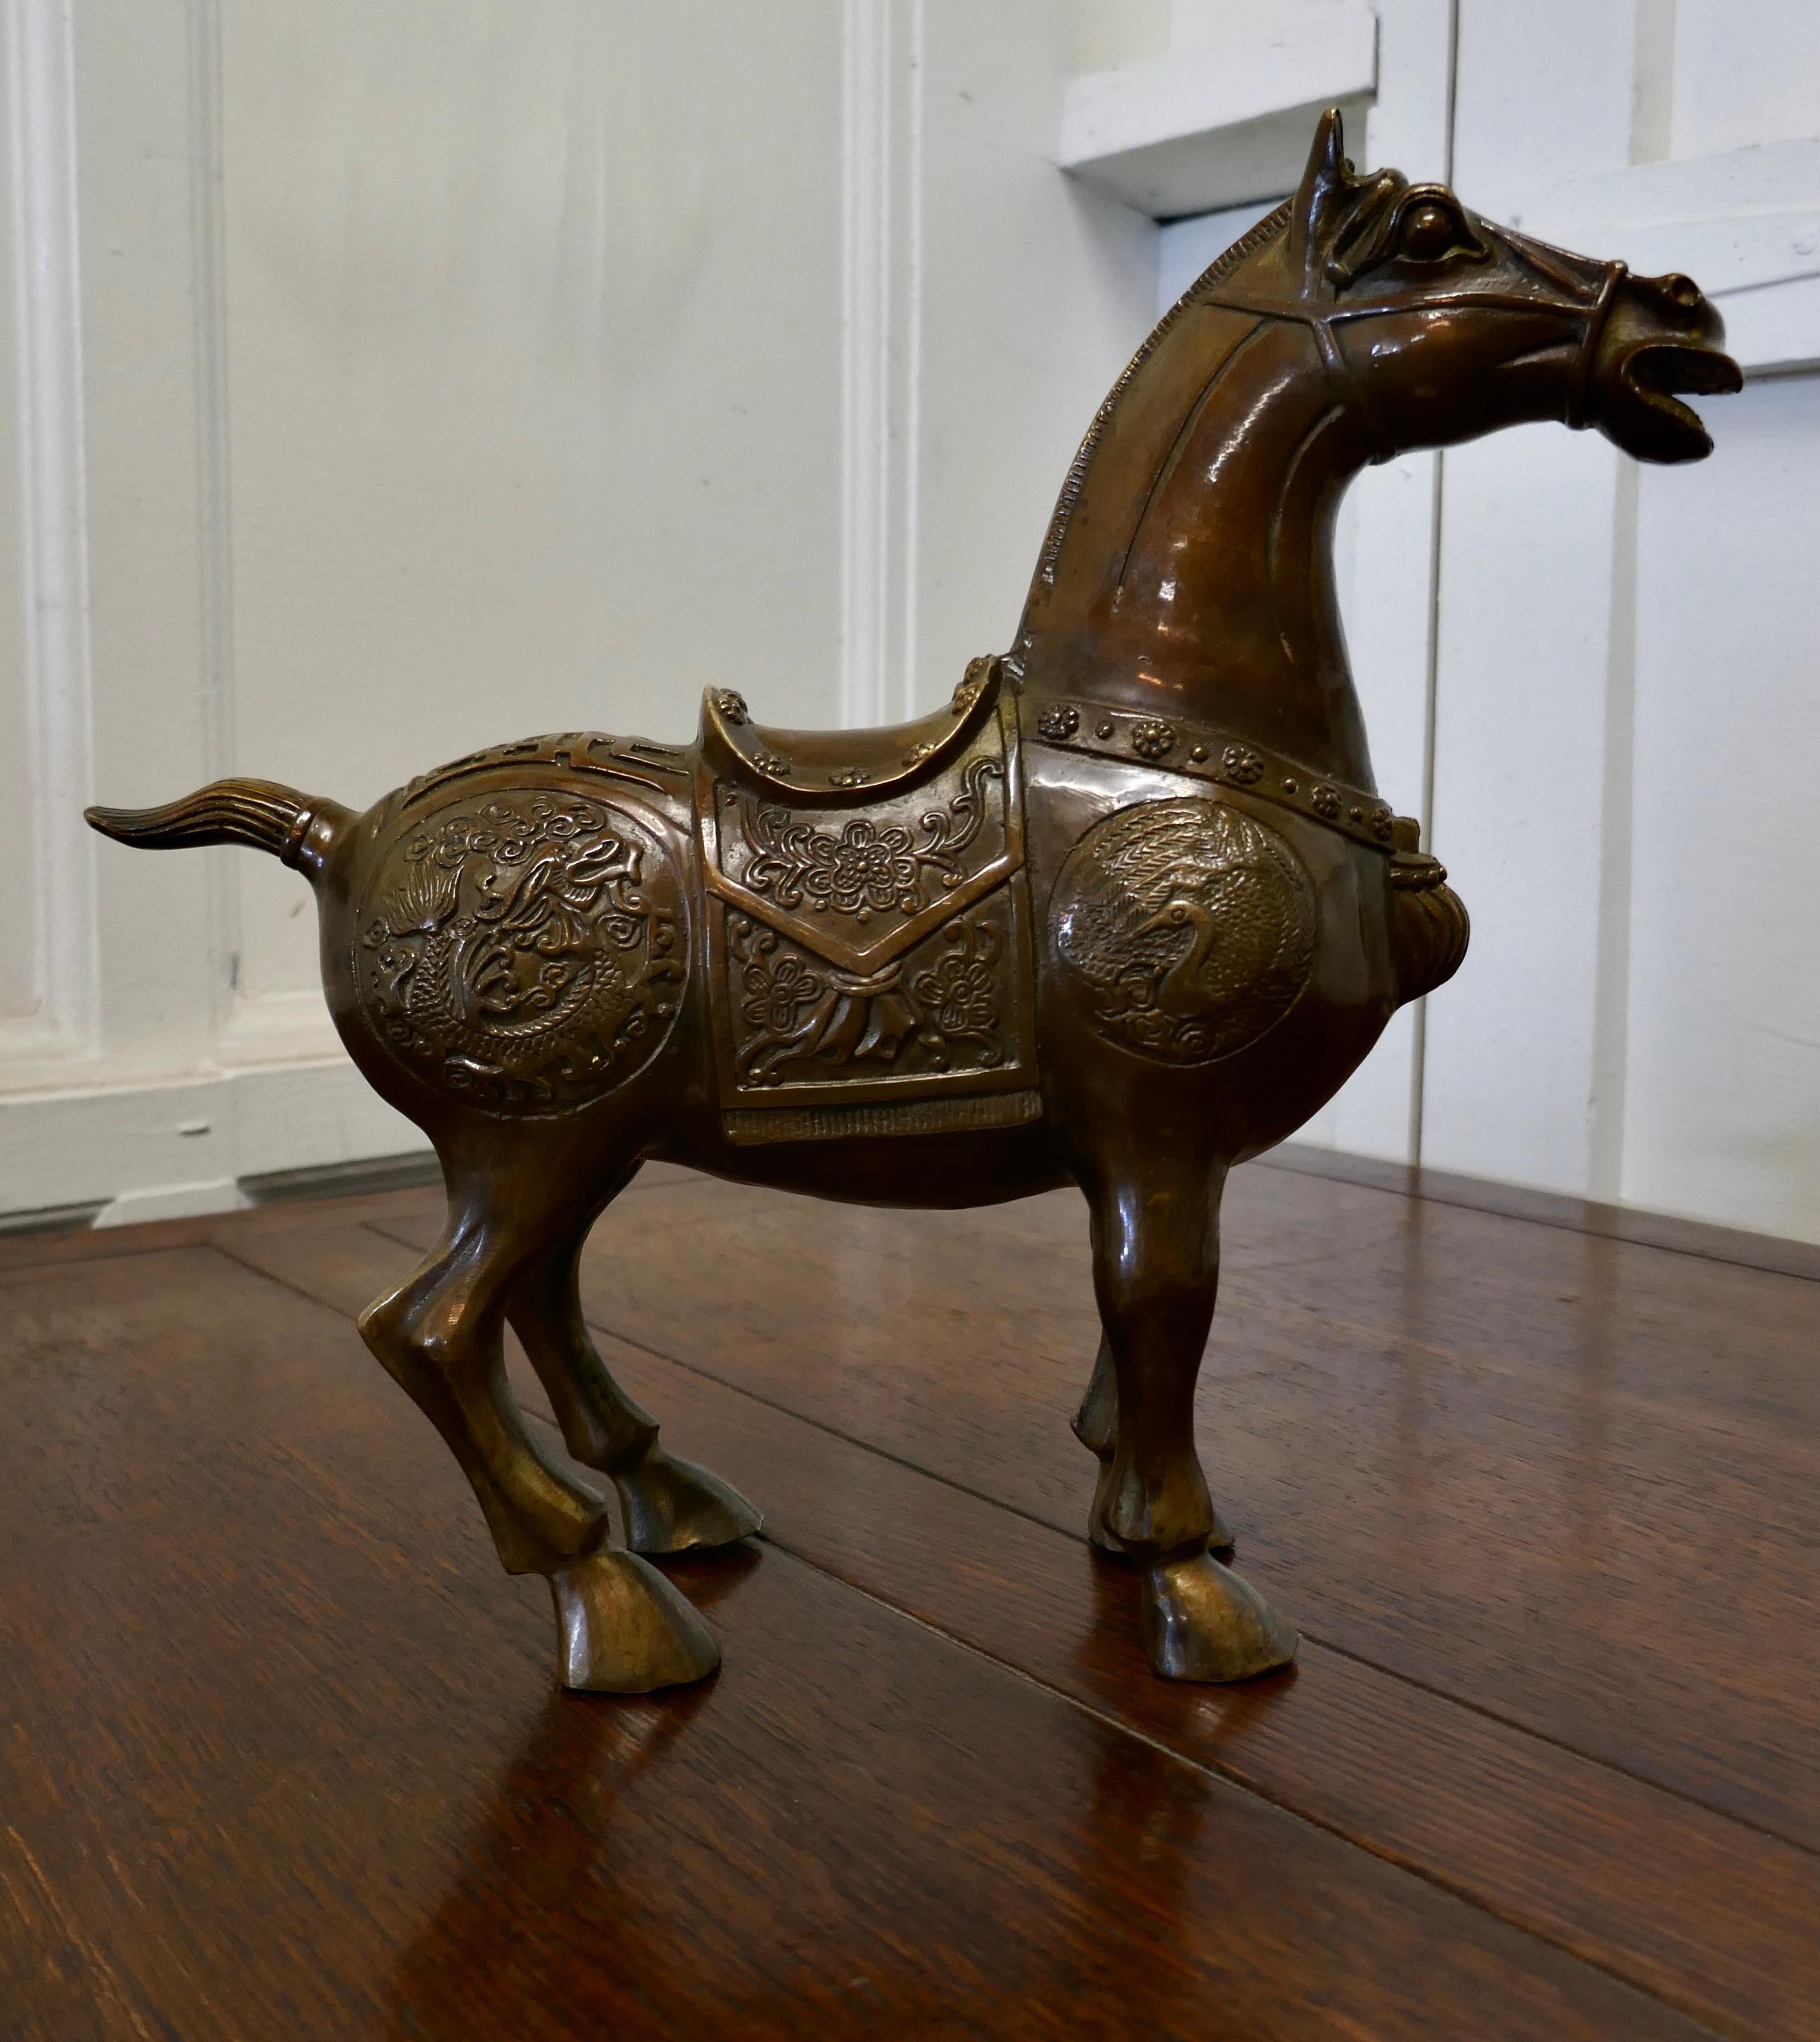 Superb decorated bronze tang horse

This is a superb piece of Chinese Folk Art, superbly cast in bronze, in the classic posed statue of this famous creature 
This is a fine piece, intricately decorated in his full costume, wearing a ceremonial